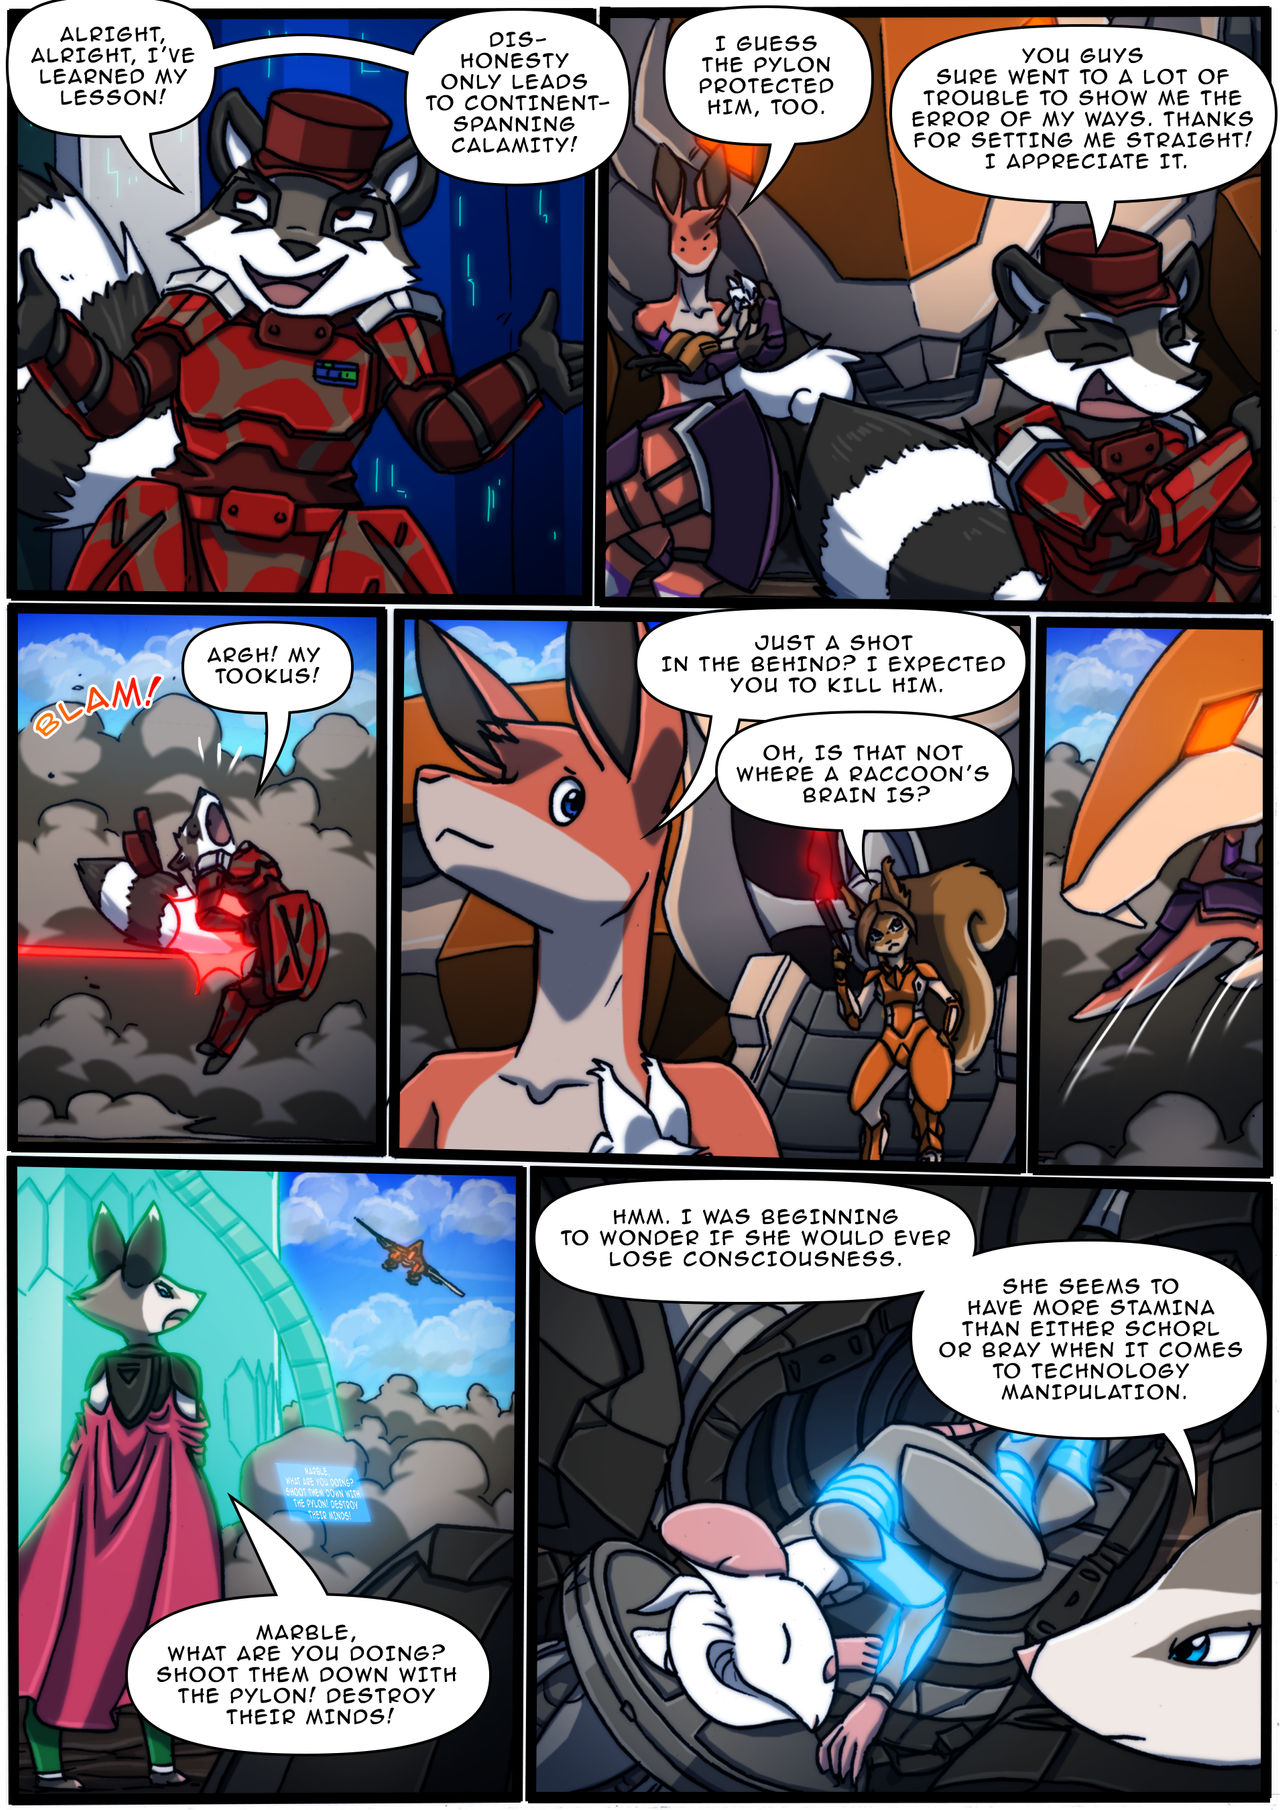 In Our Shadow Part 2 Page 107 by kitfox-crimson on DeviantArt